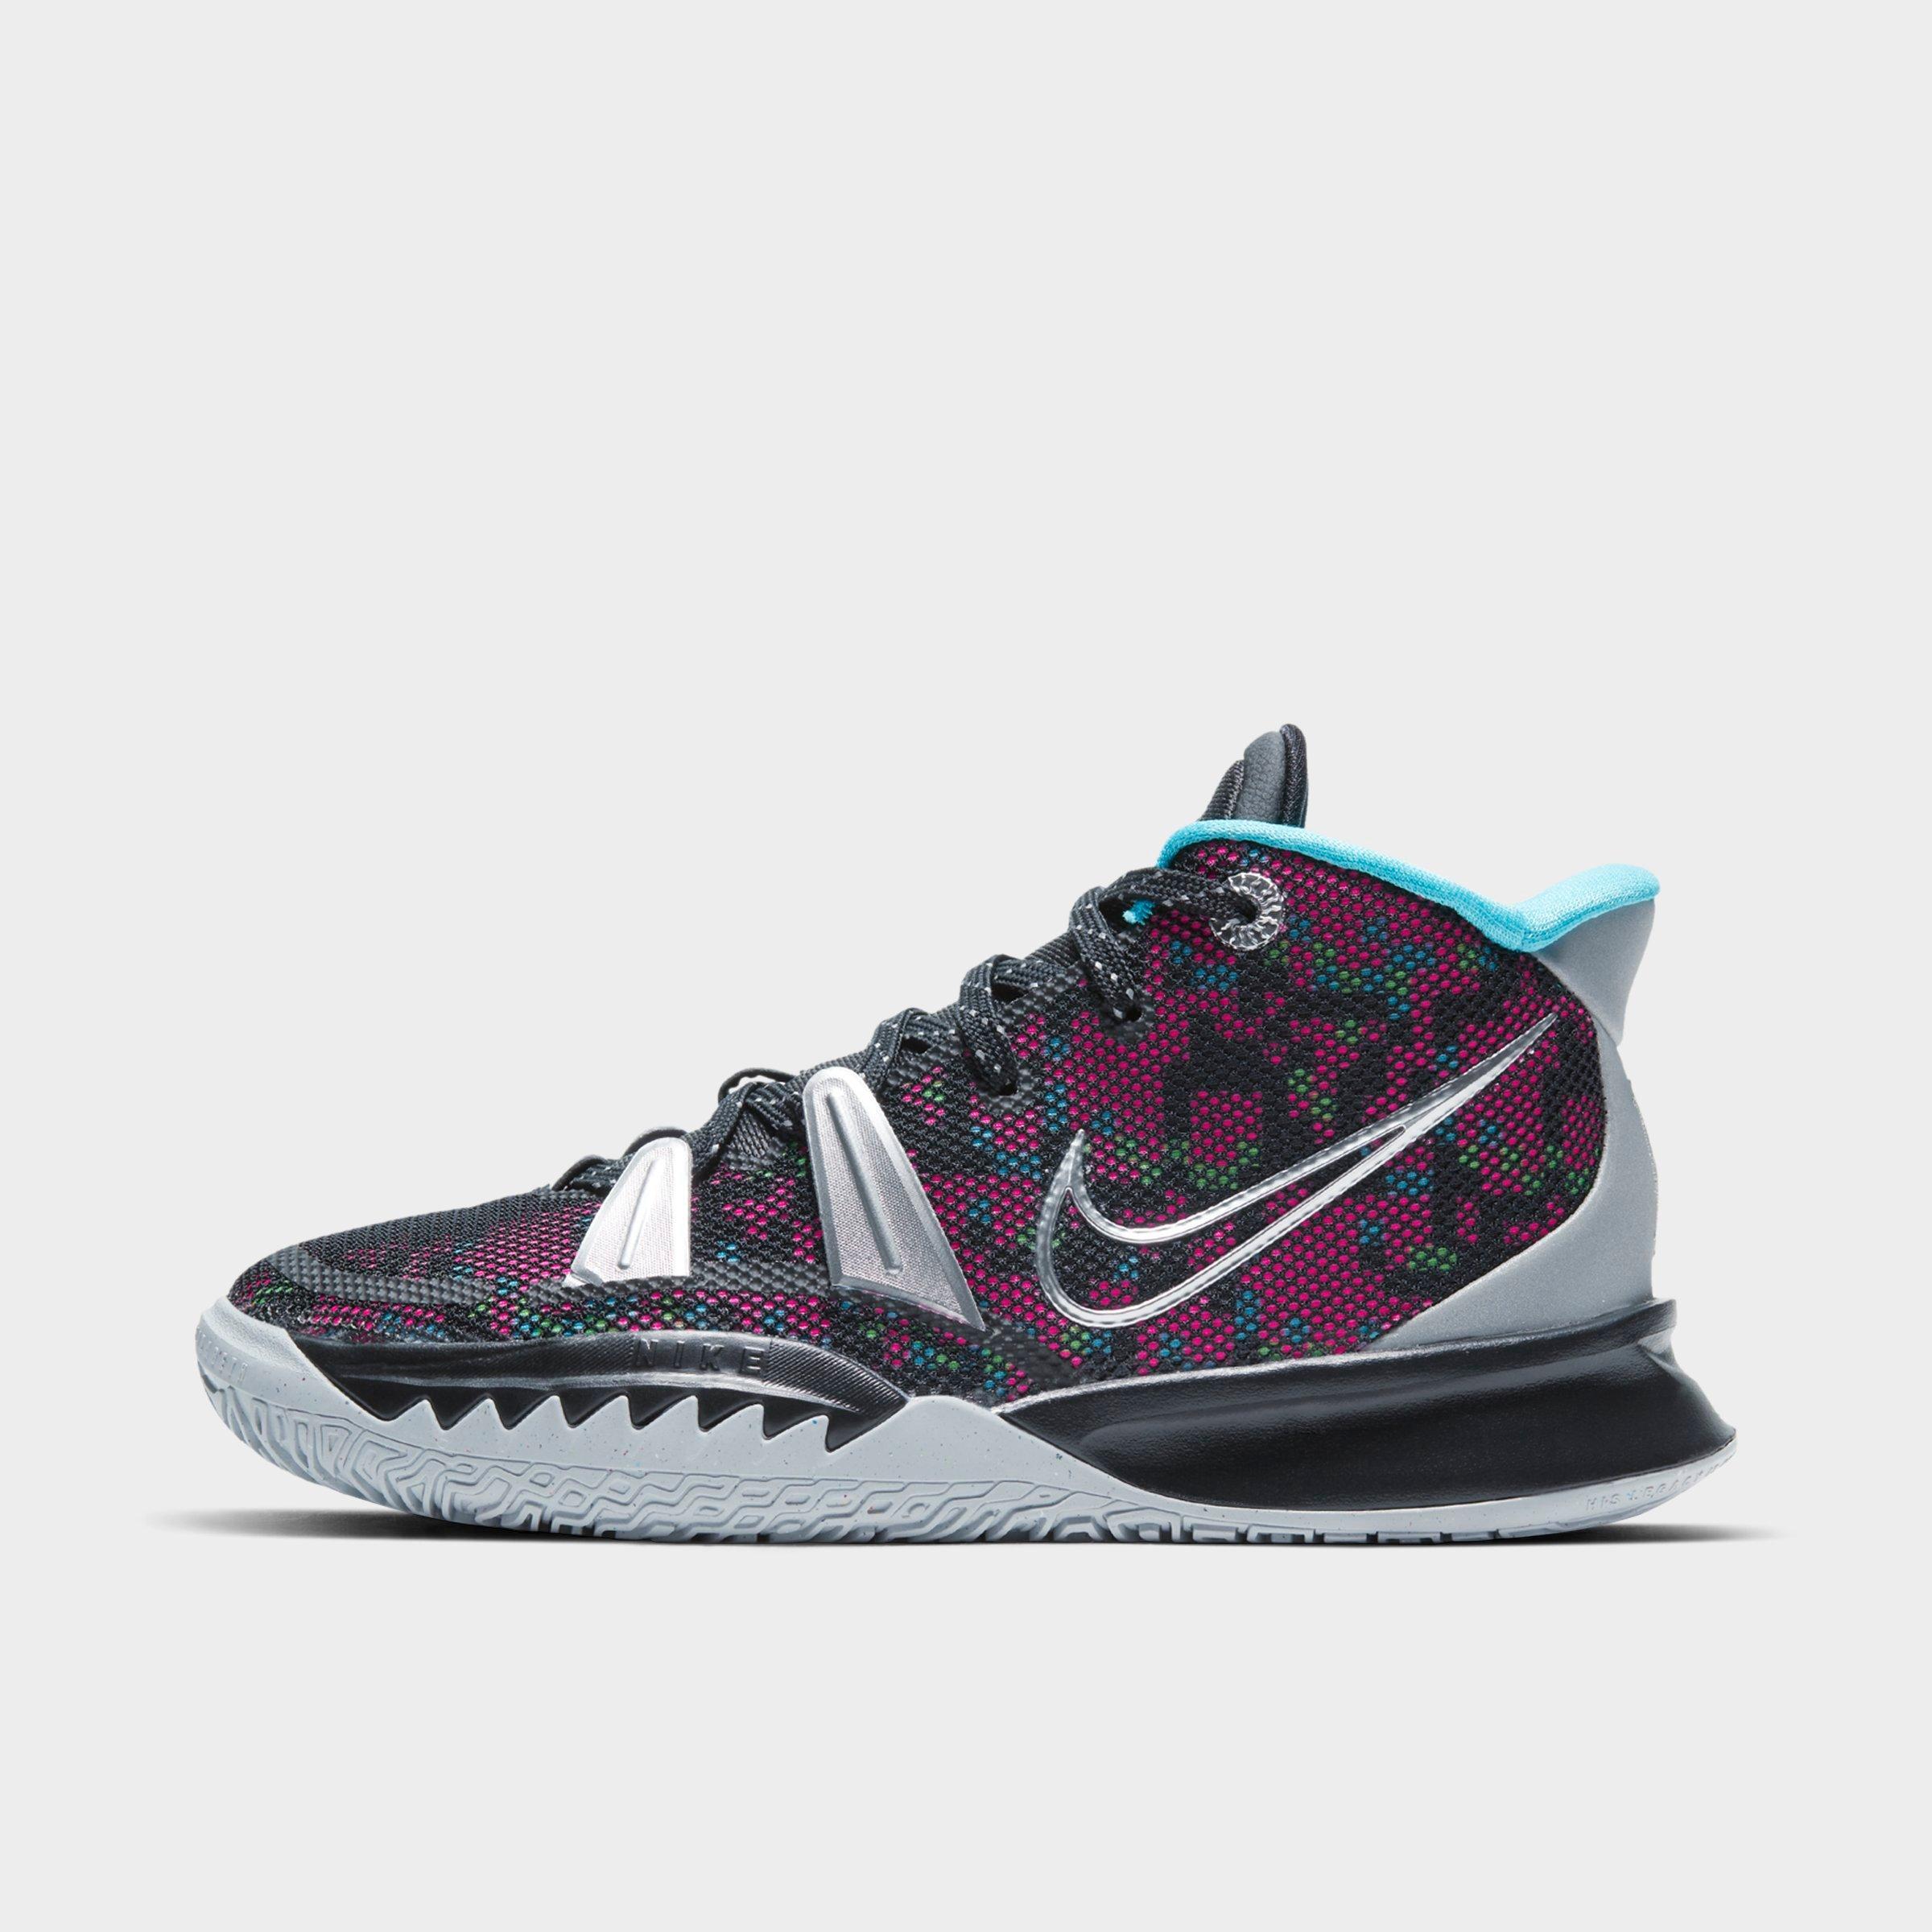 kyrie basketball shoes for girls